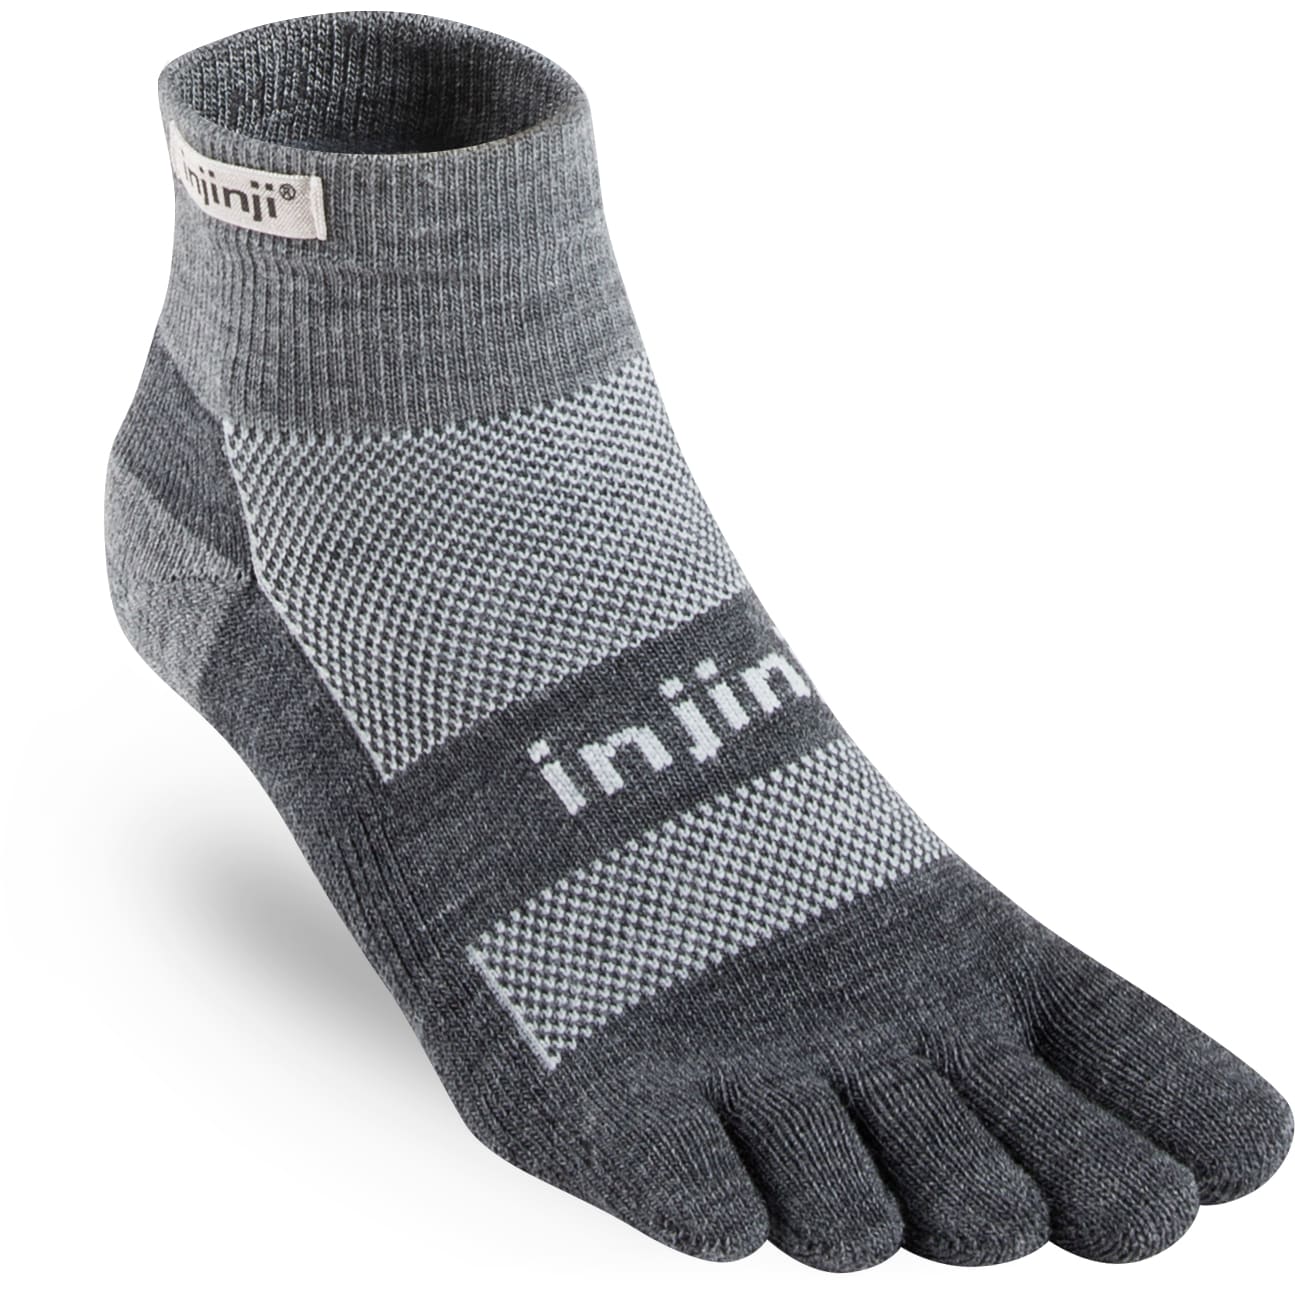 Køb Injinji Outdoor Midweight Mini-Crew fra Outnorth